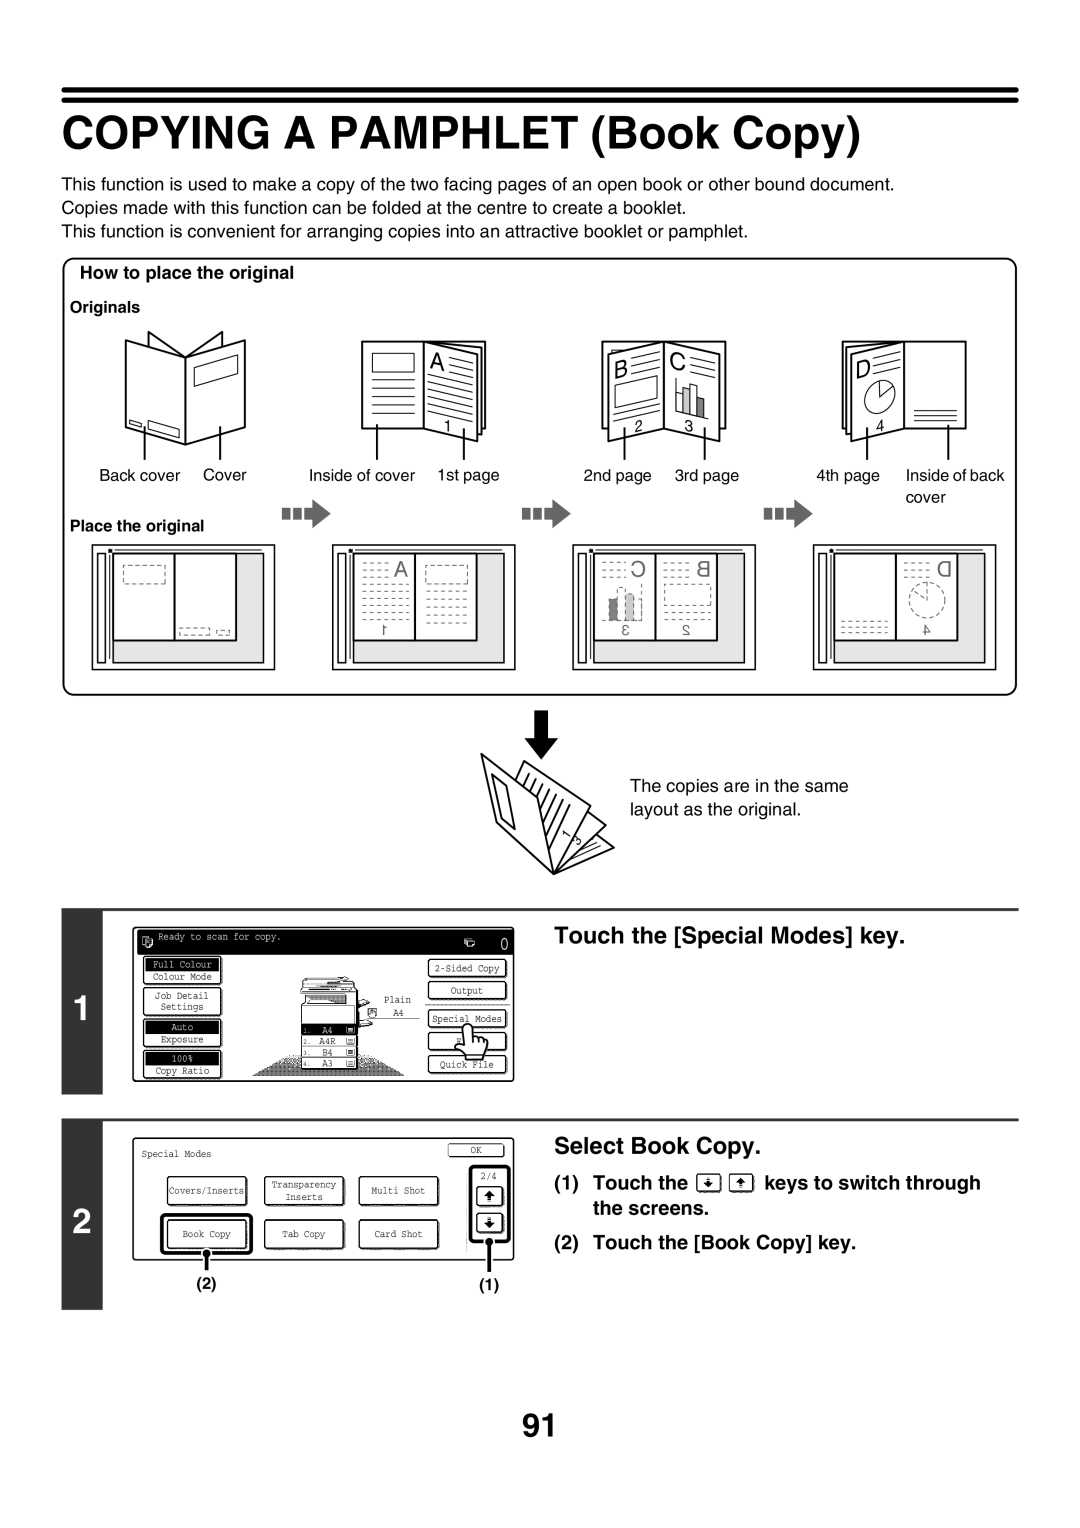 Sharp MX-2300N, MX-4501N, MX-2700N, MX-2300G manual COPYING A PAMPHLET Book Copy, Select Book Copy, Touch the Book Copy key 